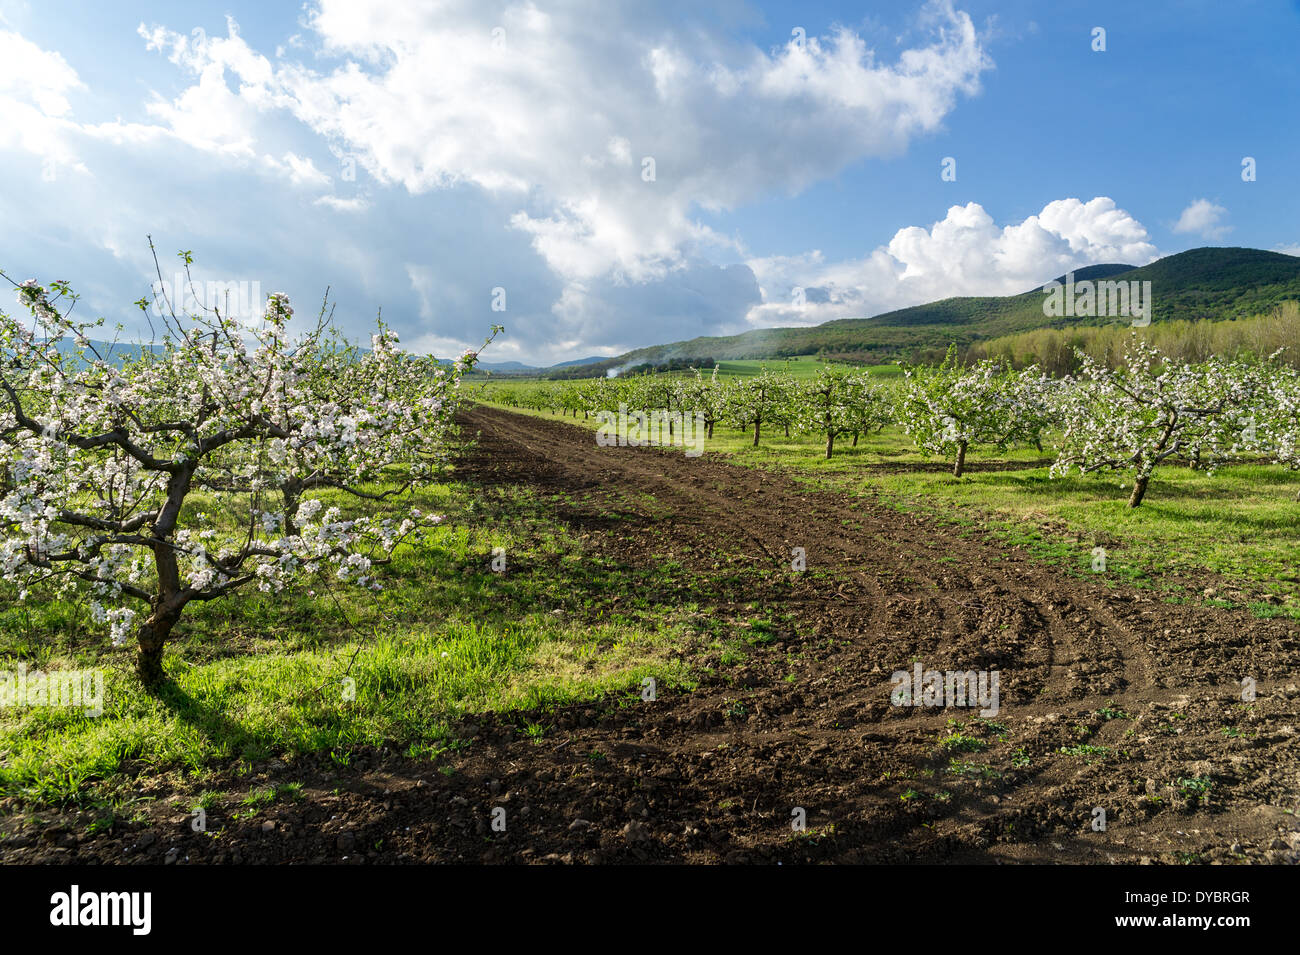 Blossoming apple trees in Hungary near to the Pilis mountains Stock Photo